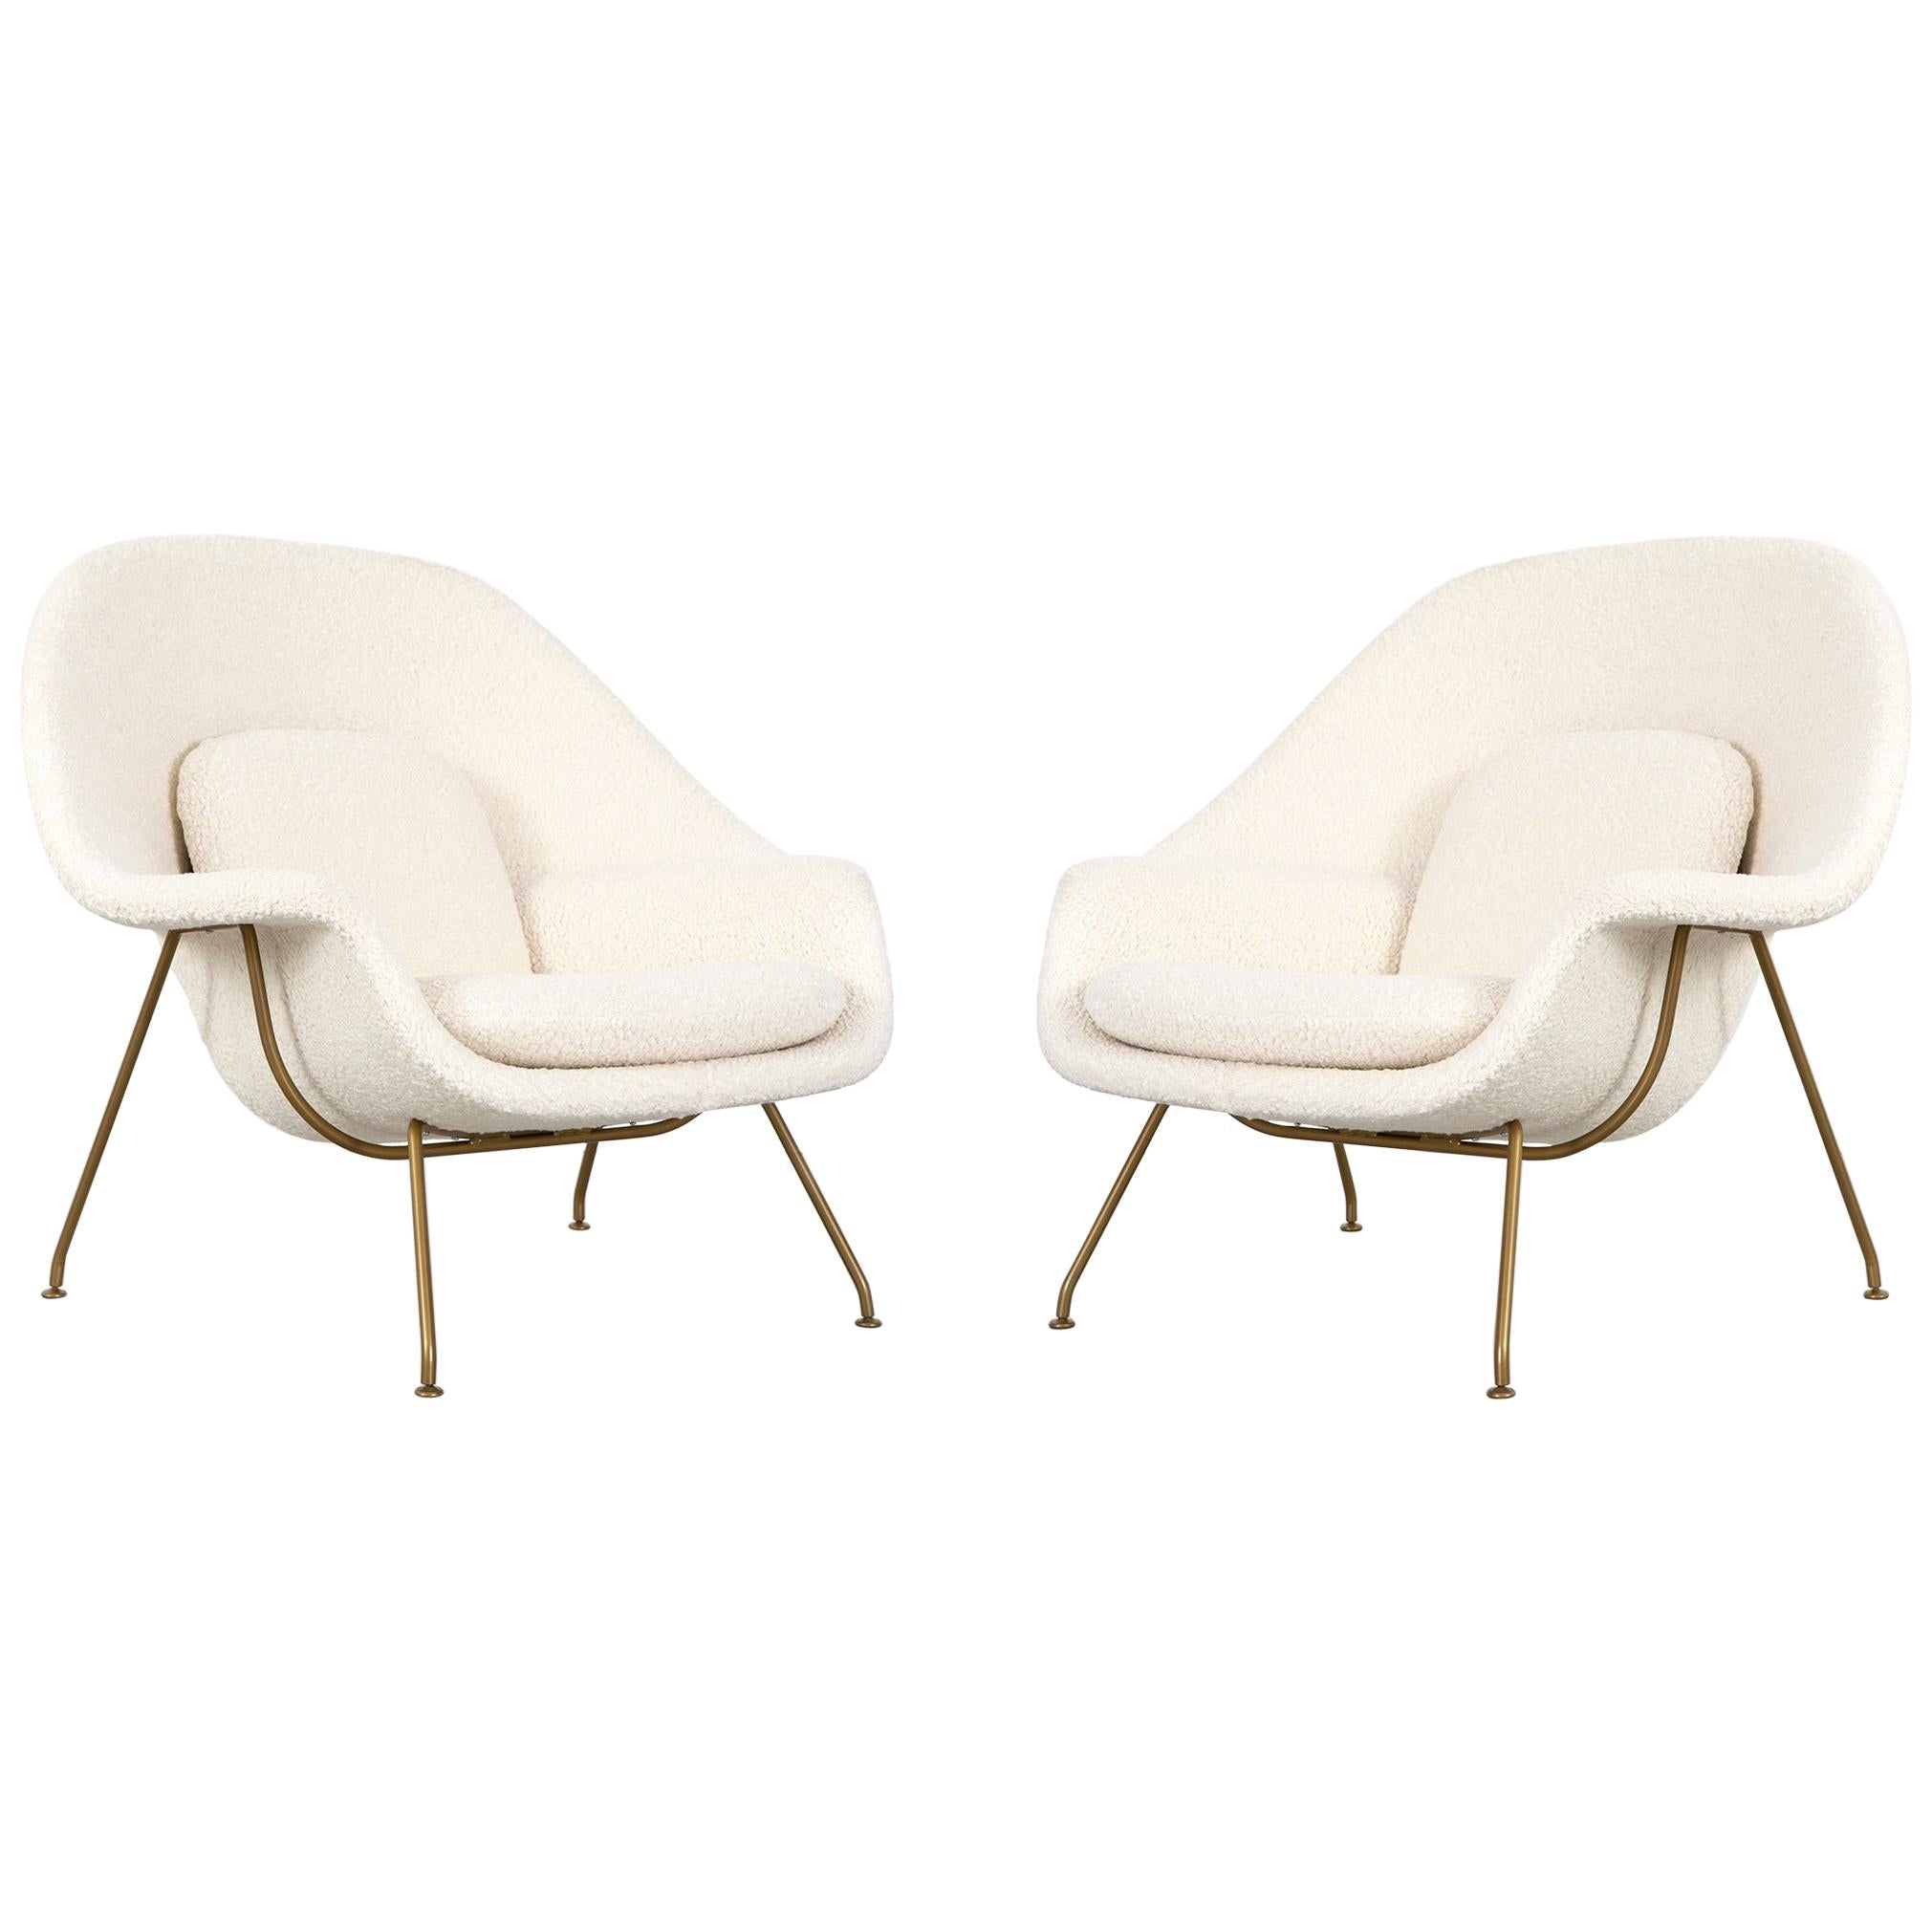 Set of Saarinen for Knoll Mid-Century Modern Womb Chairs with Brass Bases